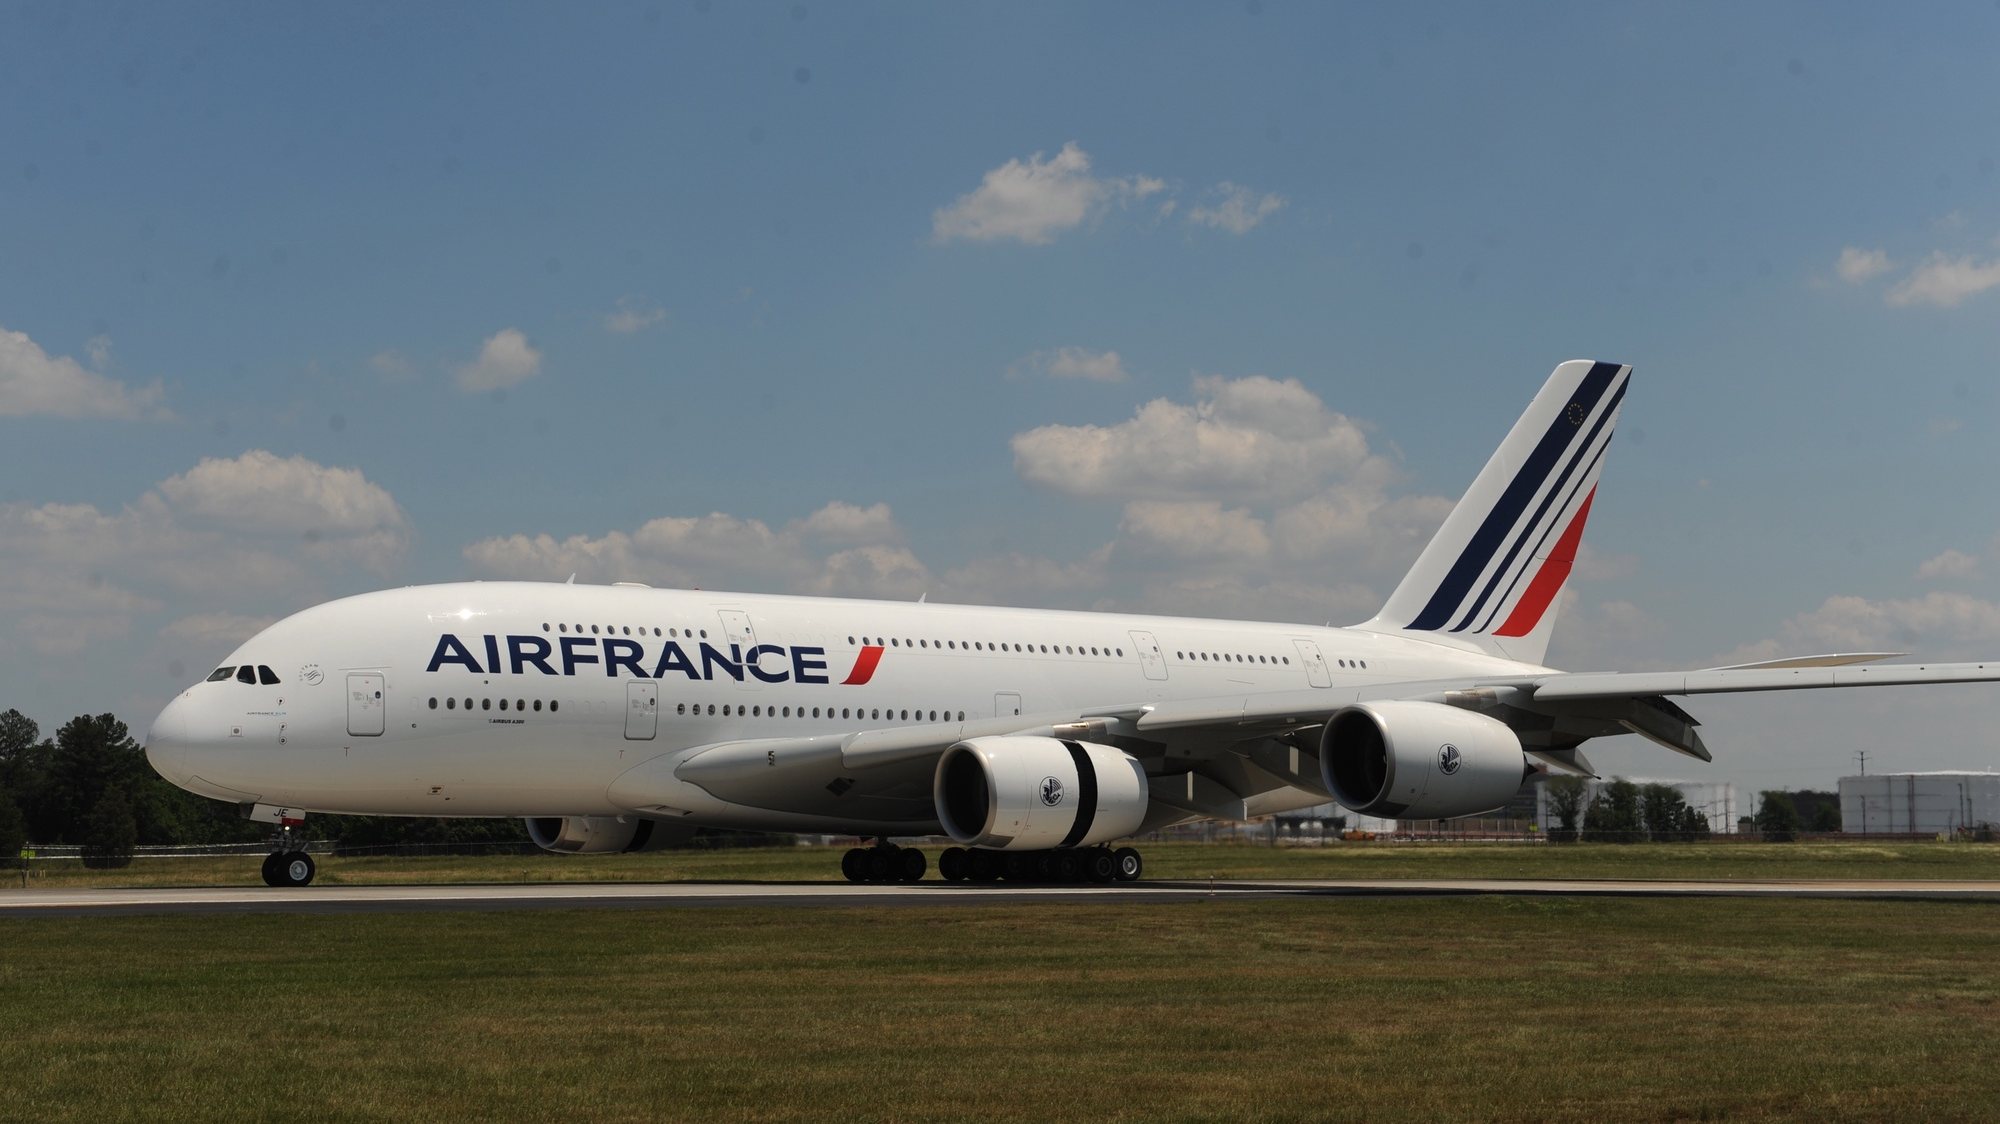 epa08435463 (FILE) - An Air France Airbus A380, the world&#039;s largest passenger aircraft, arrives after the first commercial flight from Paris to Washington, at Washington Dulles International Airport, in Sterling, Virginia, USA, 06 June 2011 (reissued 21 May 2020). According to media reports, Air France is to immediately phase out their A380 fleet. The move was initiallay slated for 2022, but was introduced earlier due to declining passenger numbers amid the COVID-19 crisis.  EPA/MICHAEL REYNOLDS *** Local Caption *** 02769414